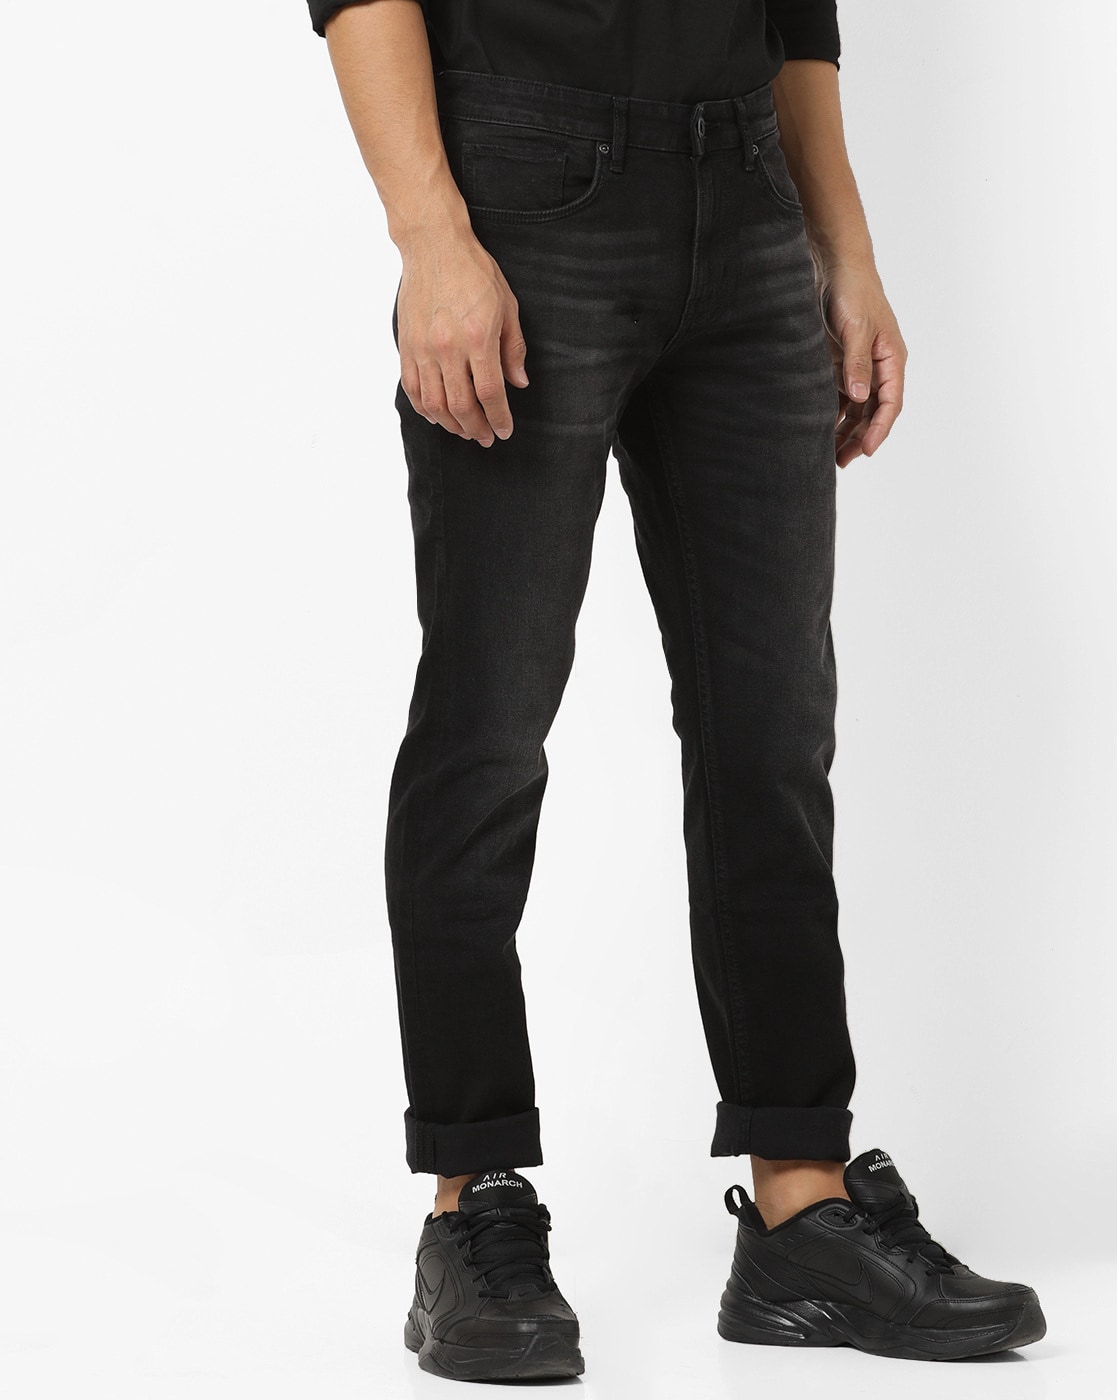 Buy Red Tape Men's Olive Solid Washed Cotton Spandex Skinny Jeans online